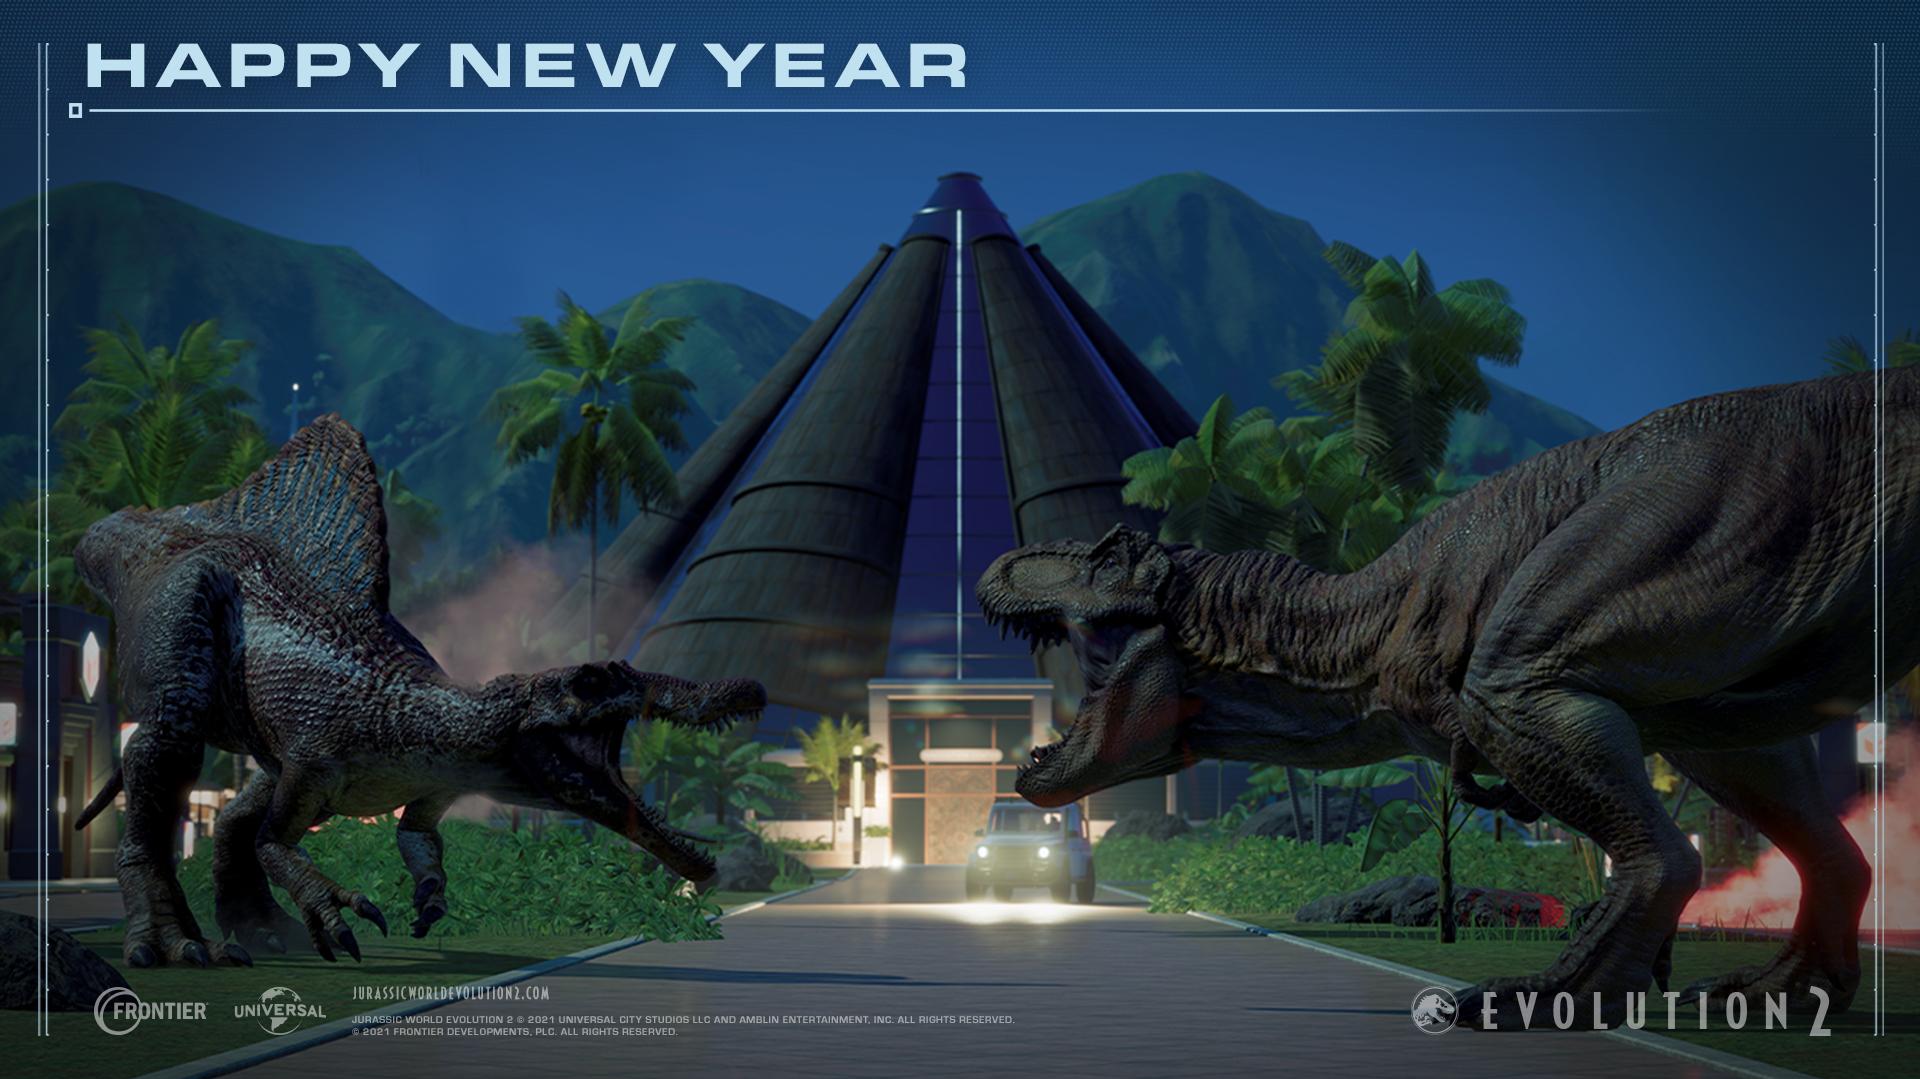 Jurassic World Evolution 2 on 2021 has come to an end